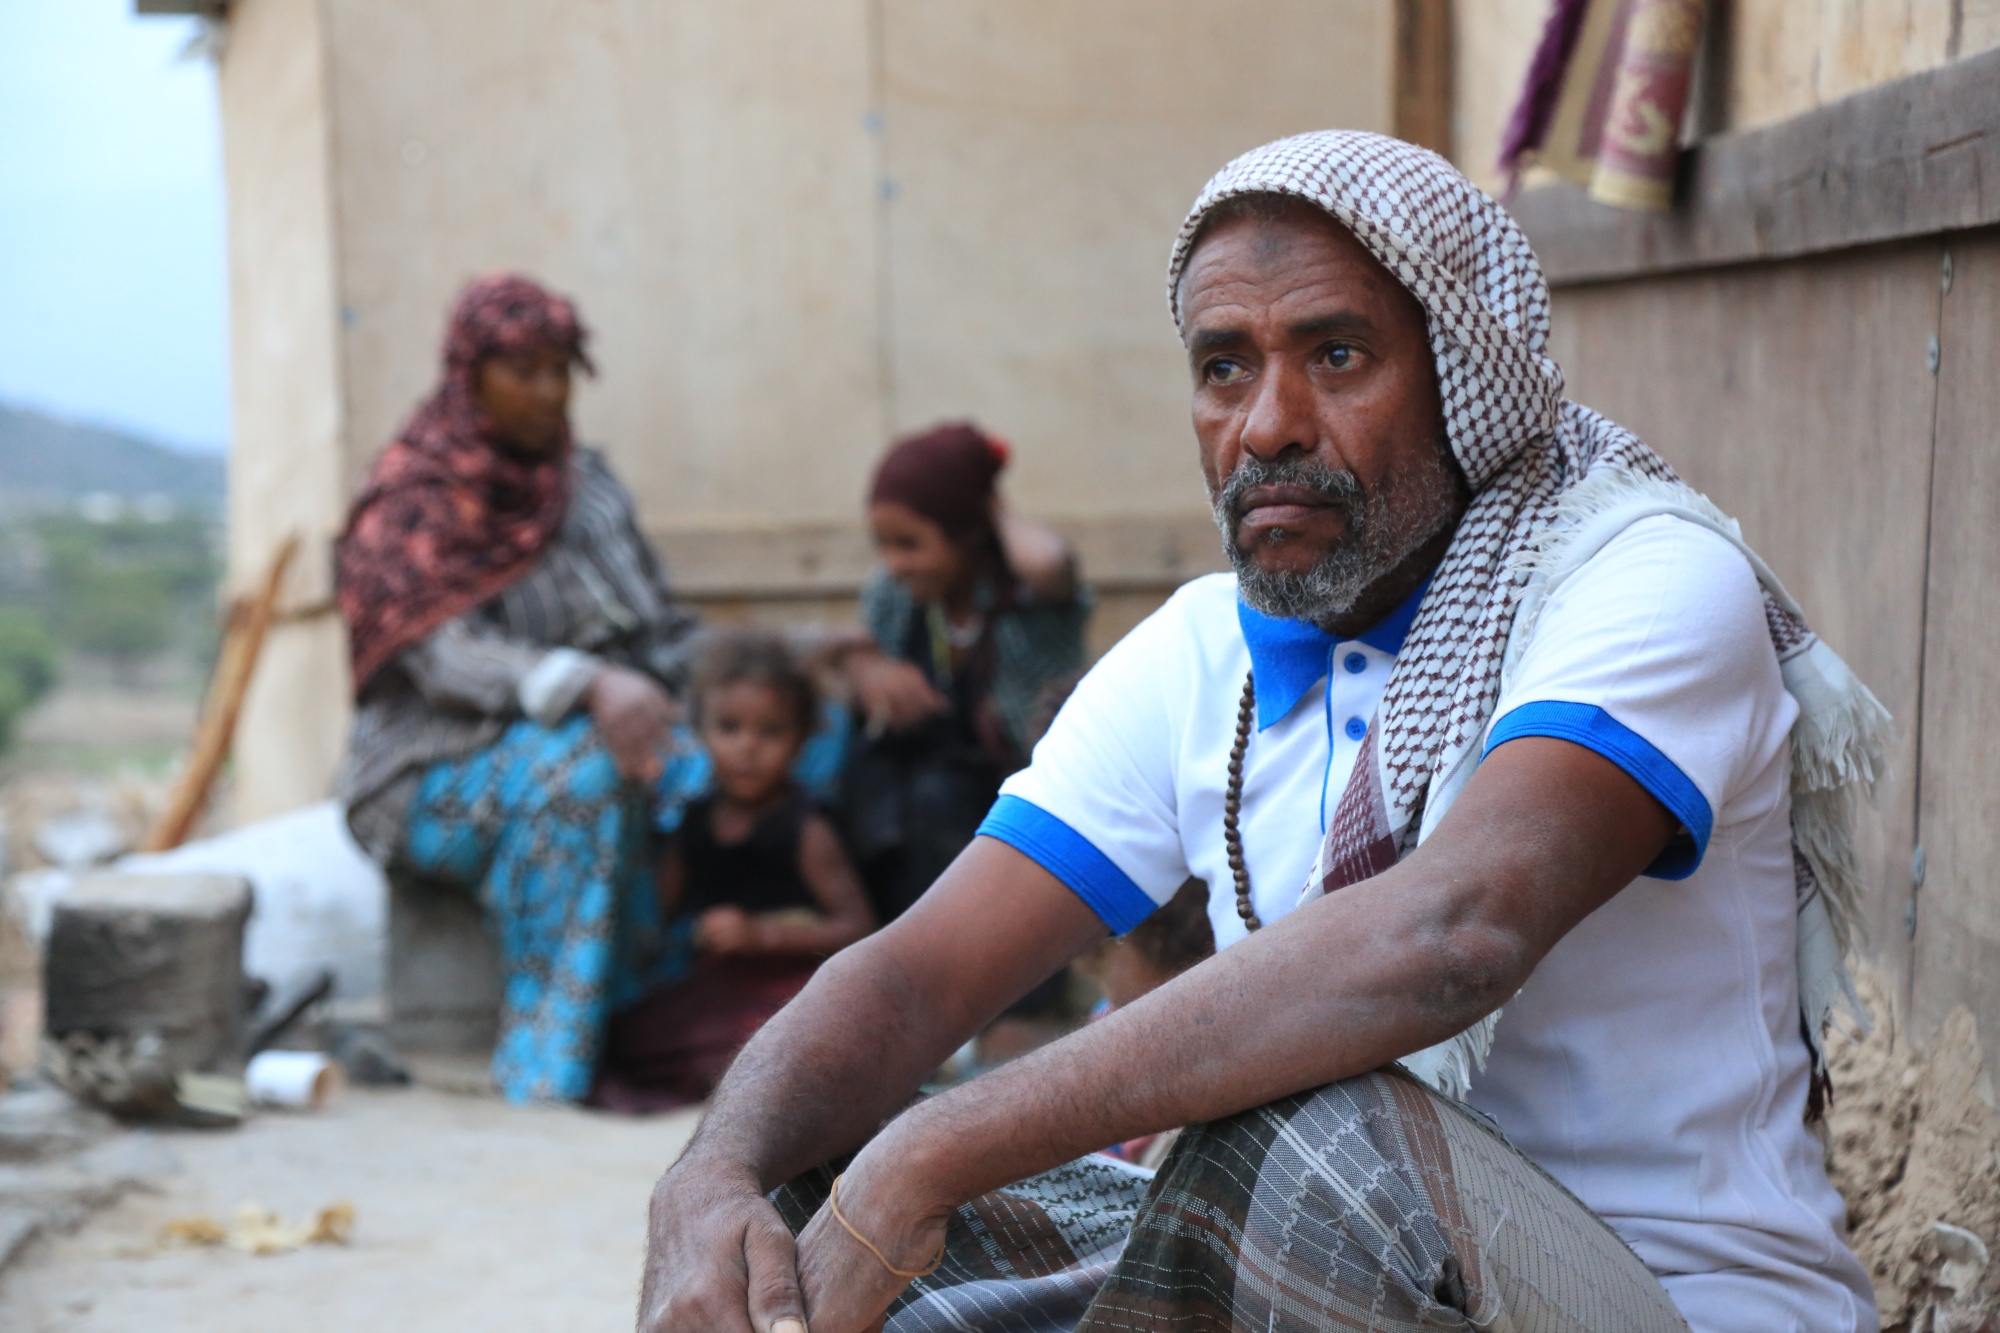 Surviving on aid, Abdu Hassan says, "is the situation of the majority of people here, not just mine" (MEE/Khalid al-Banna)